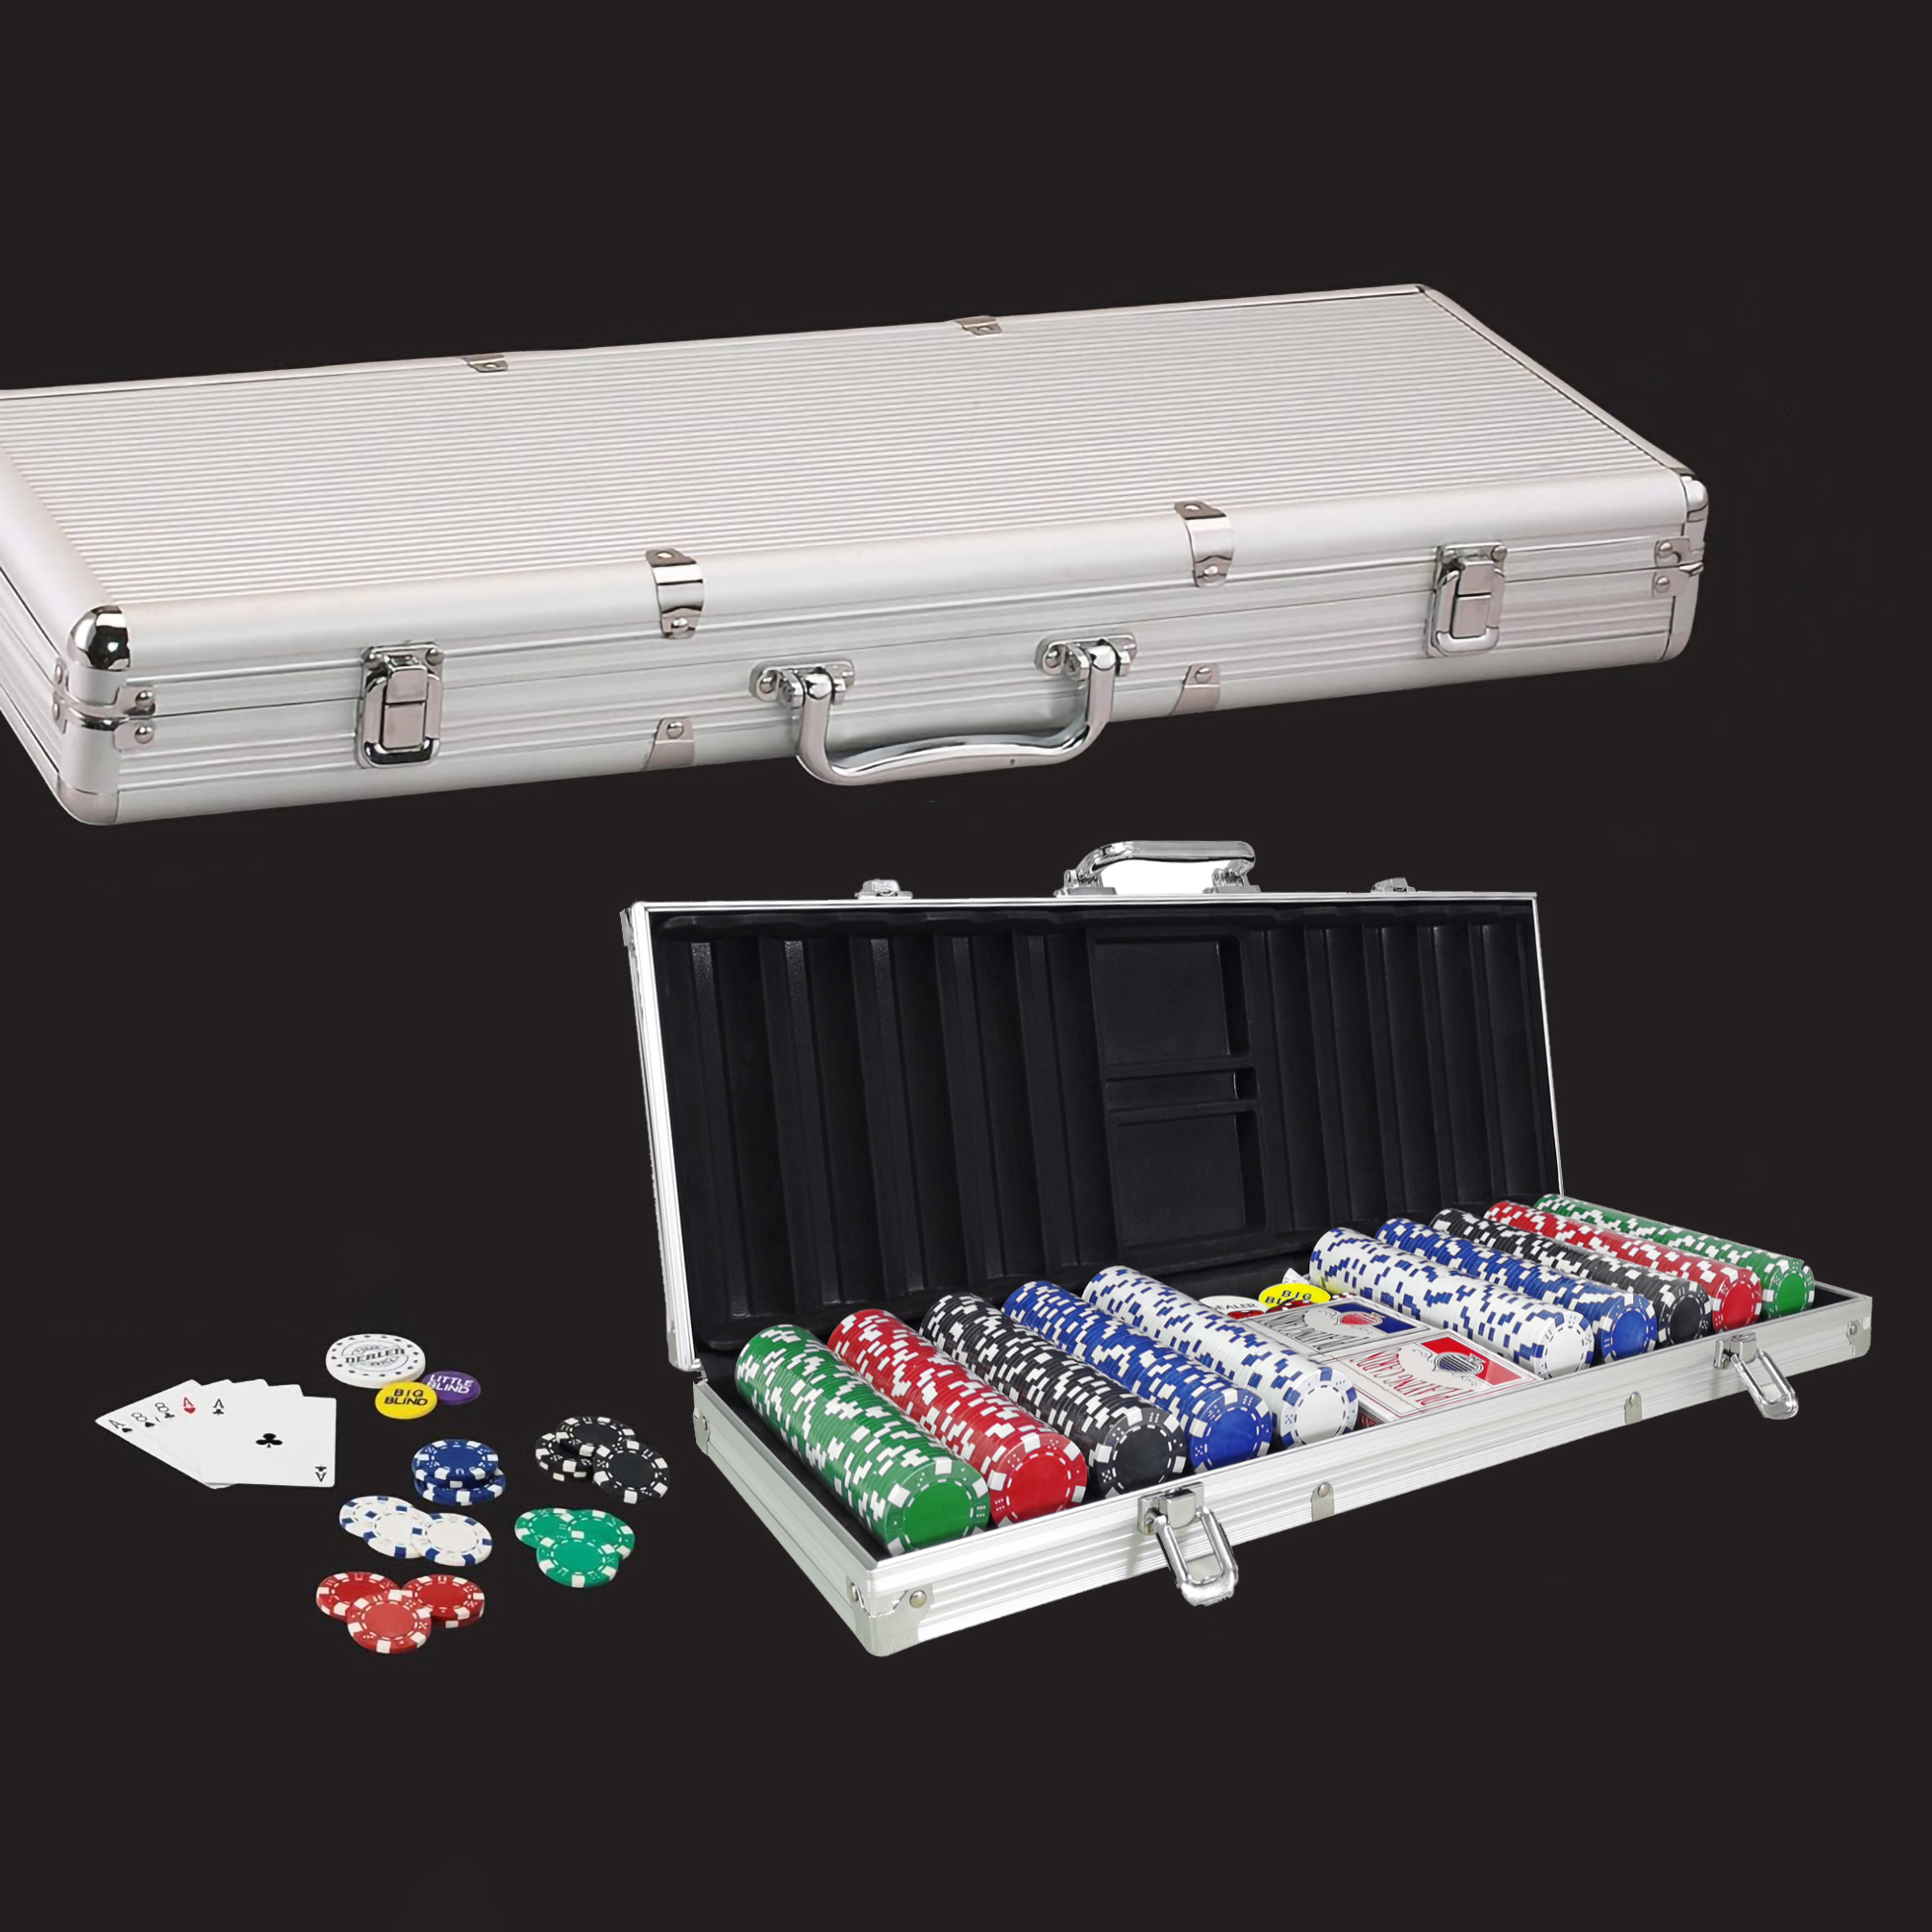 FixtureDisplays 500 pcs Poker Chip Game Set with Aluminum Case 22 X 8.4 X 2.4", 2 Decks of Paper Playing Cards, Dices, Markers for Texas